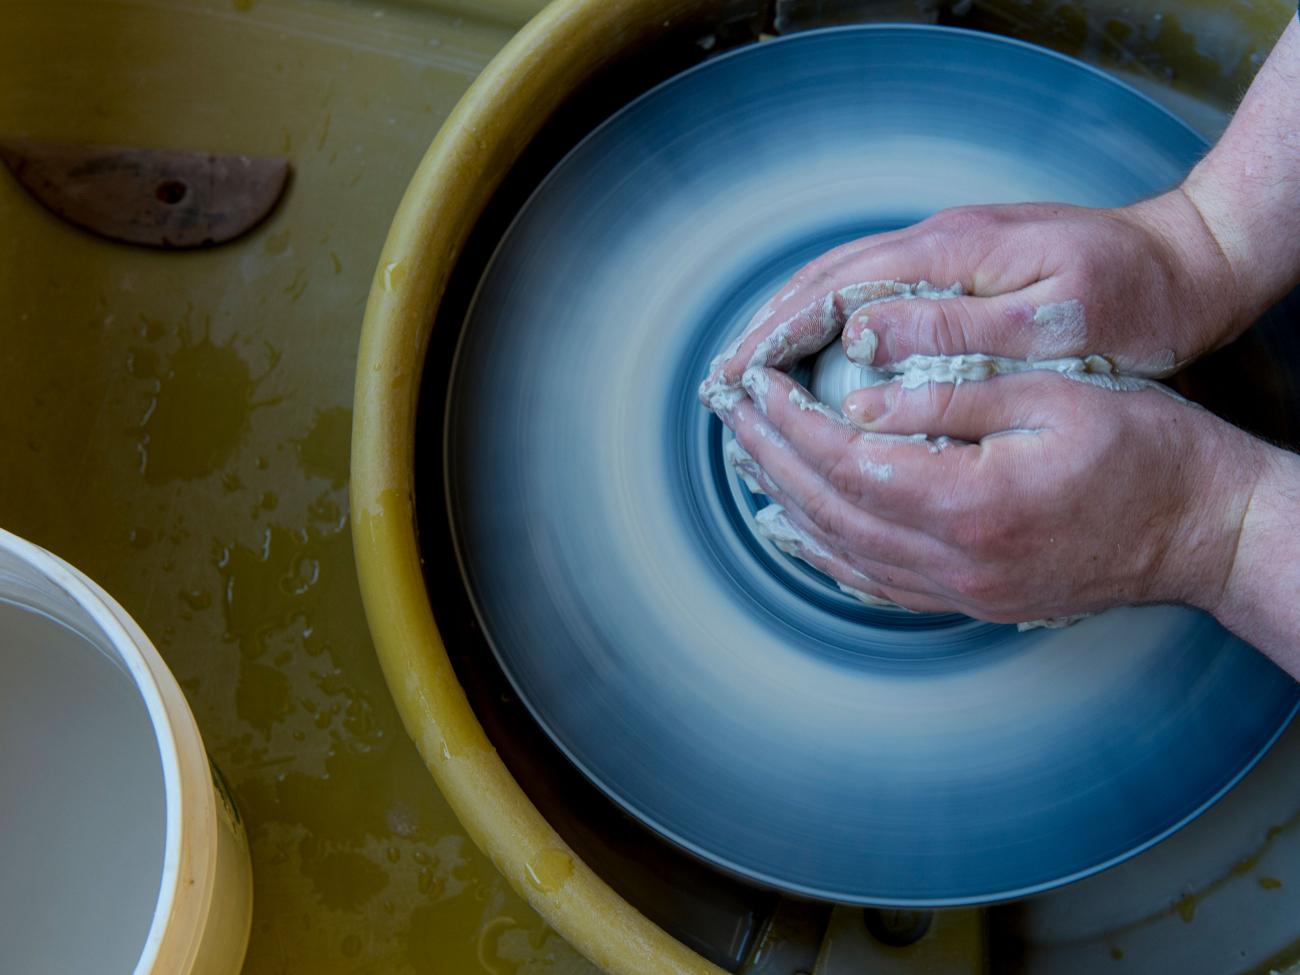 A pair of hands sculpting a clay bowl in the art studio.